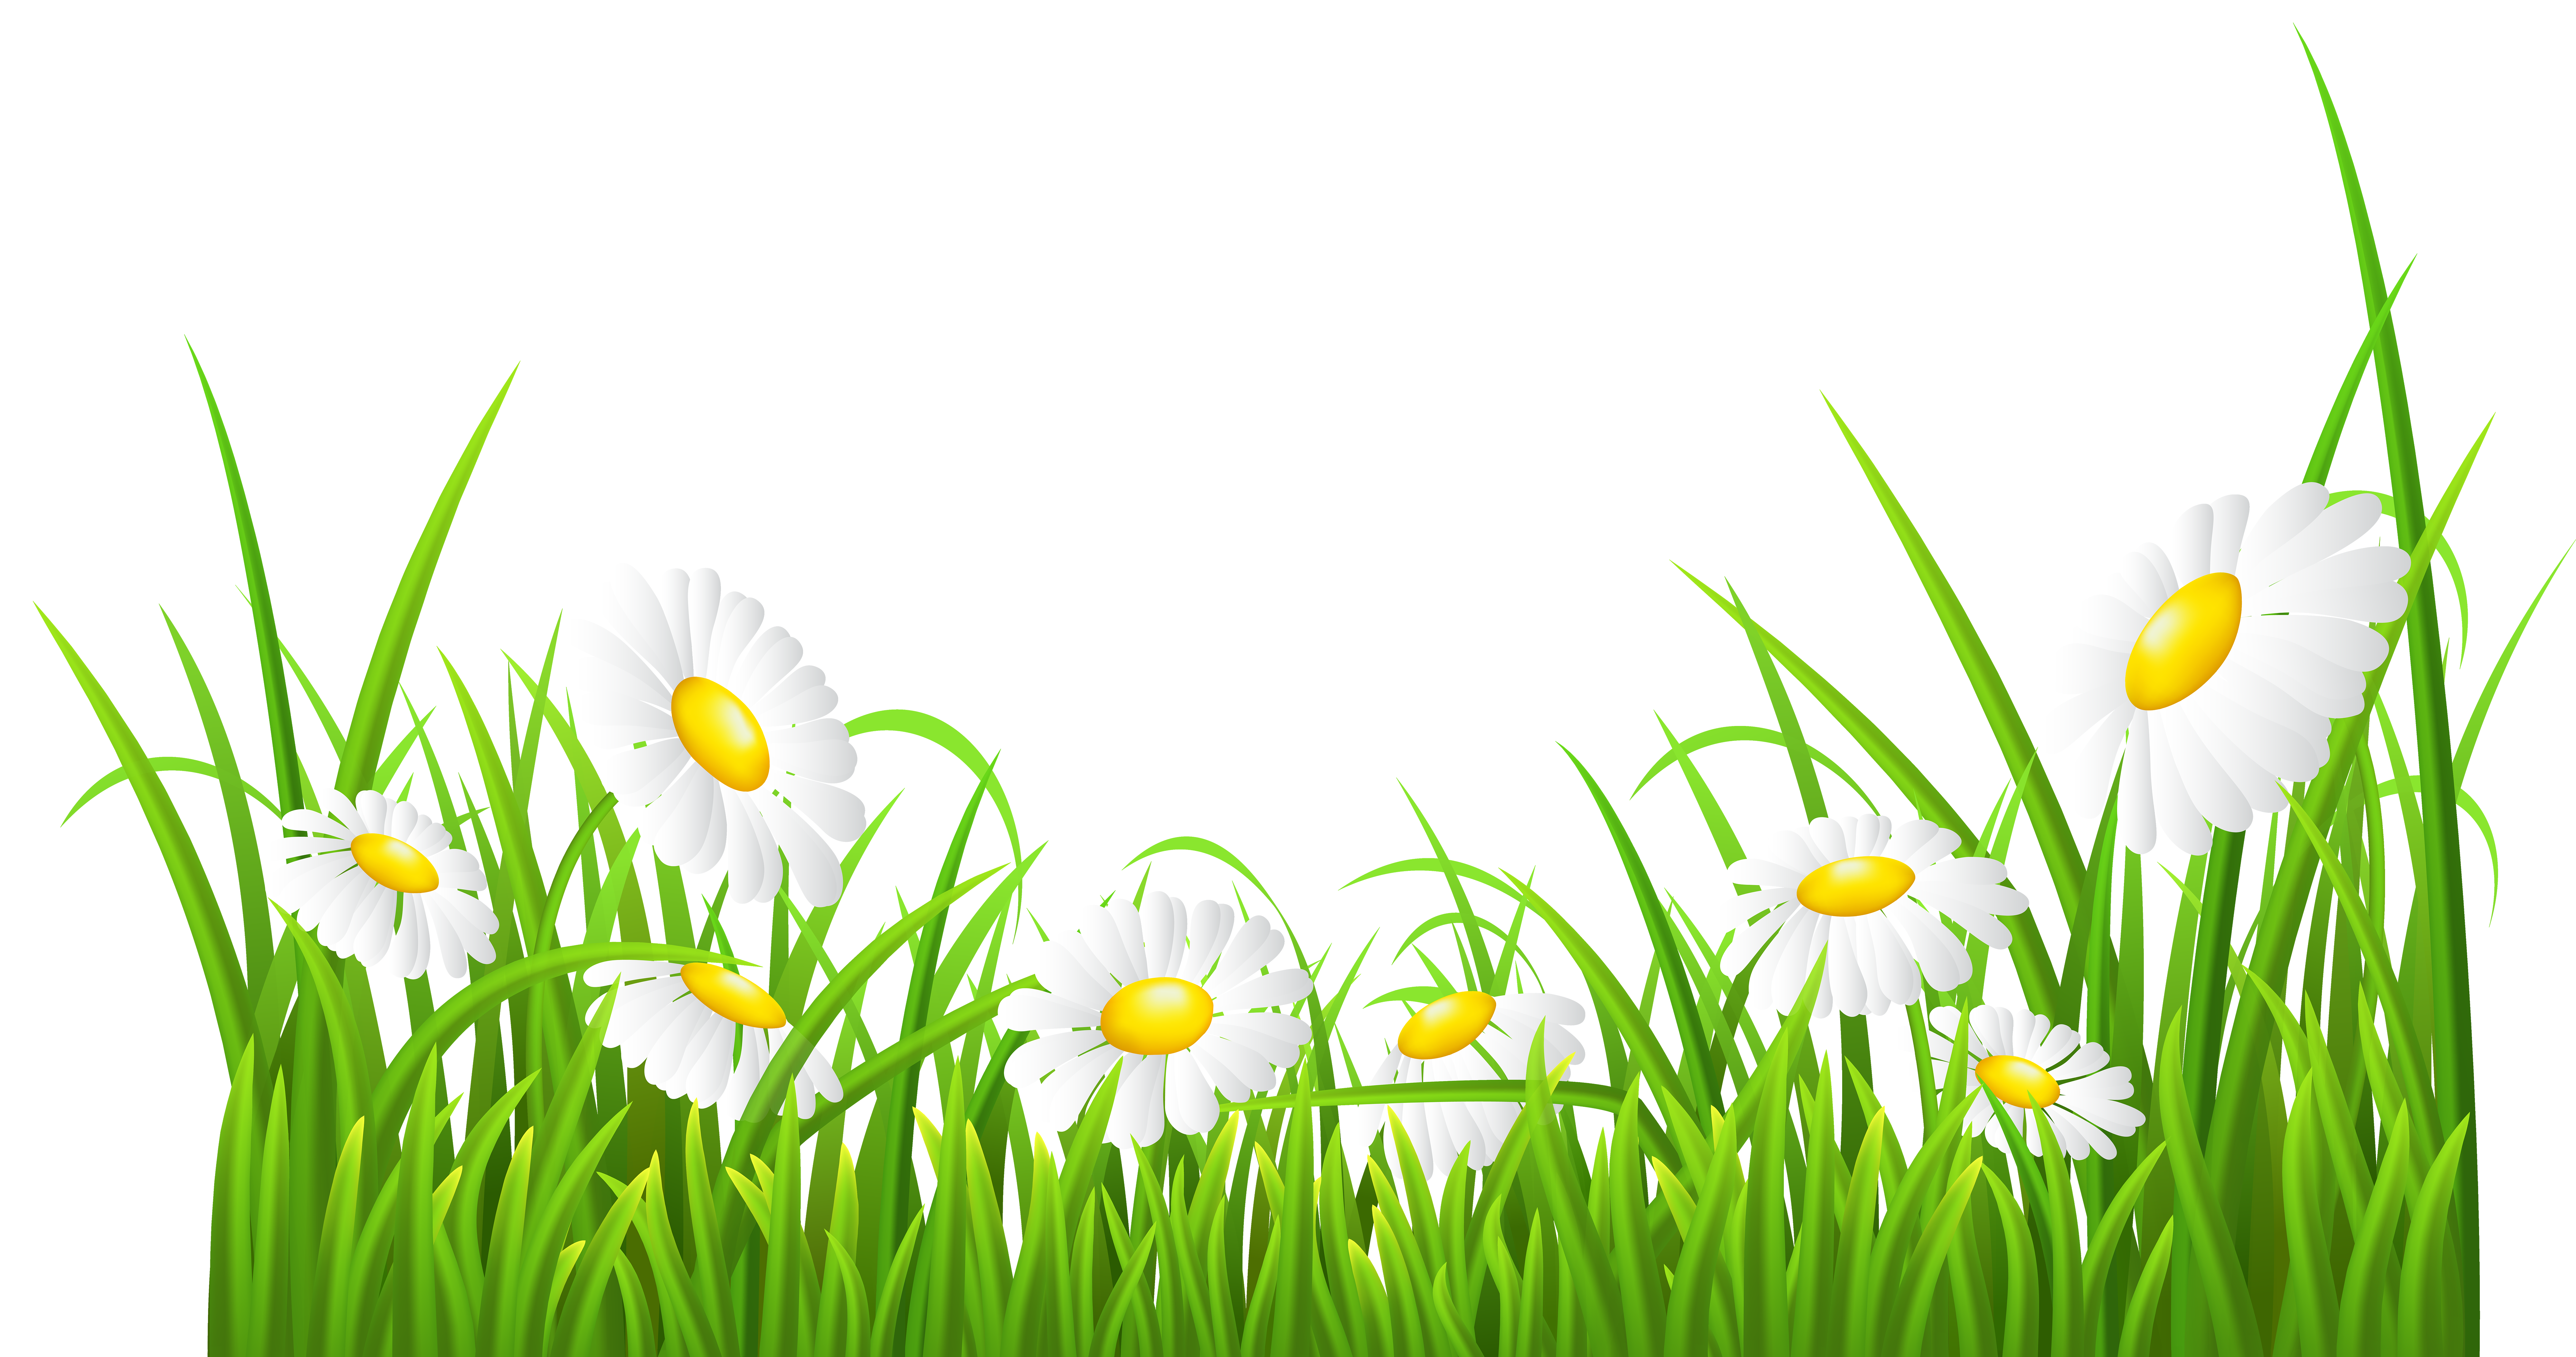 Park clipart natural environment. White daisies and grass